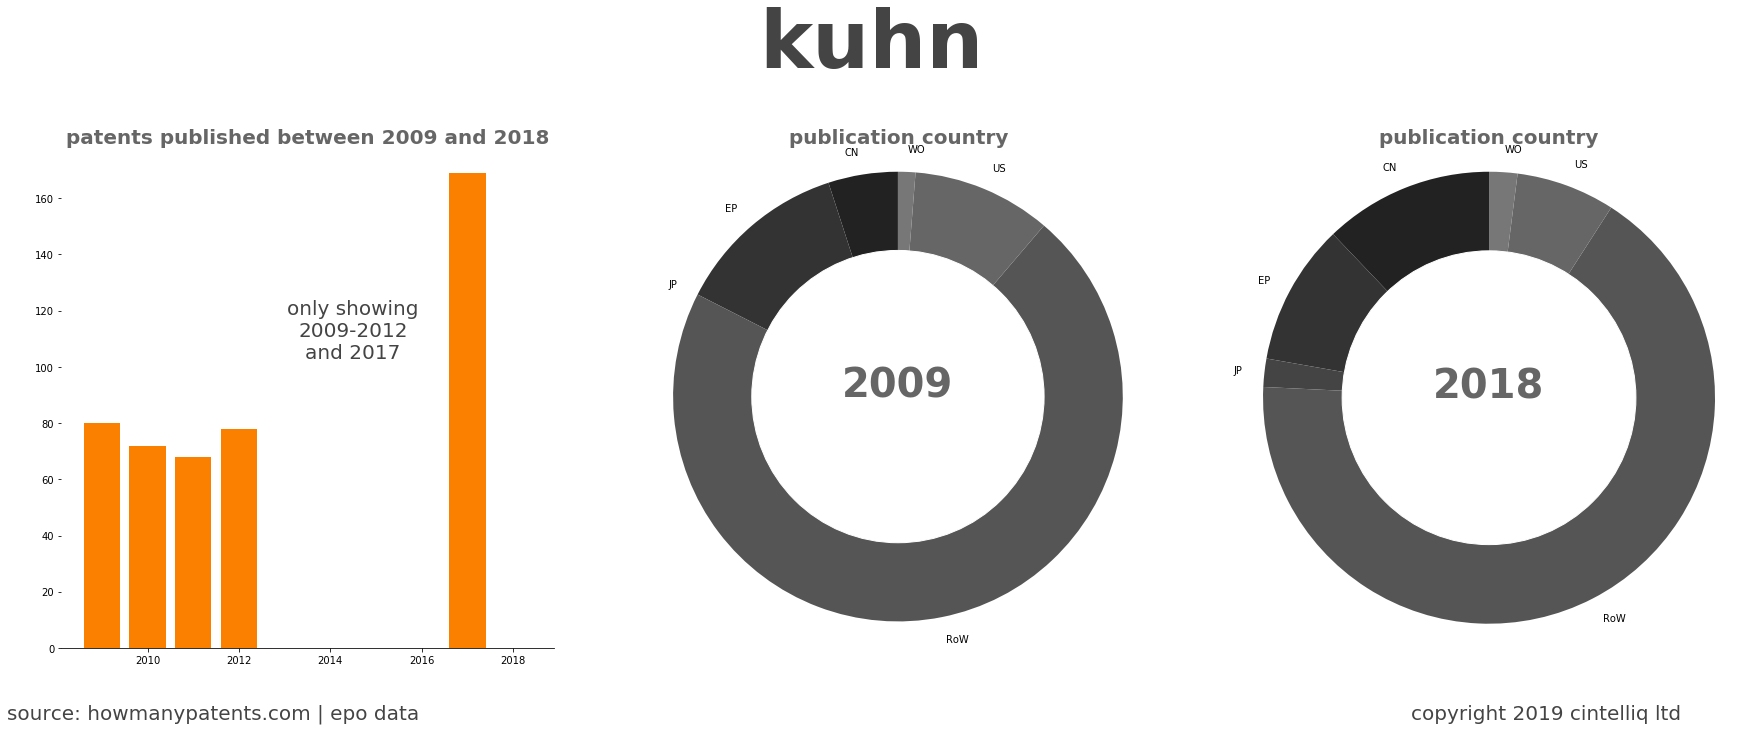 summary of patents for Kuhn